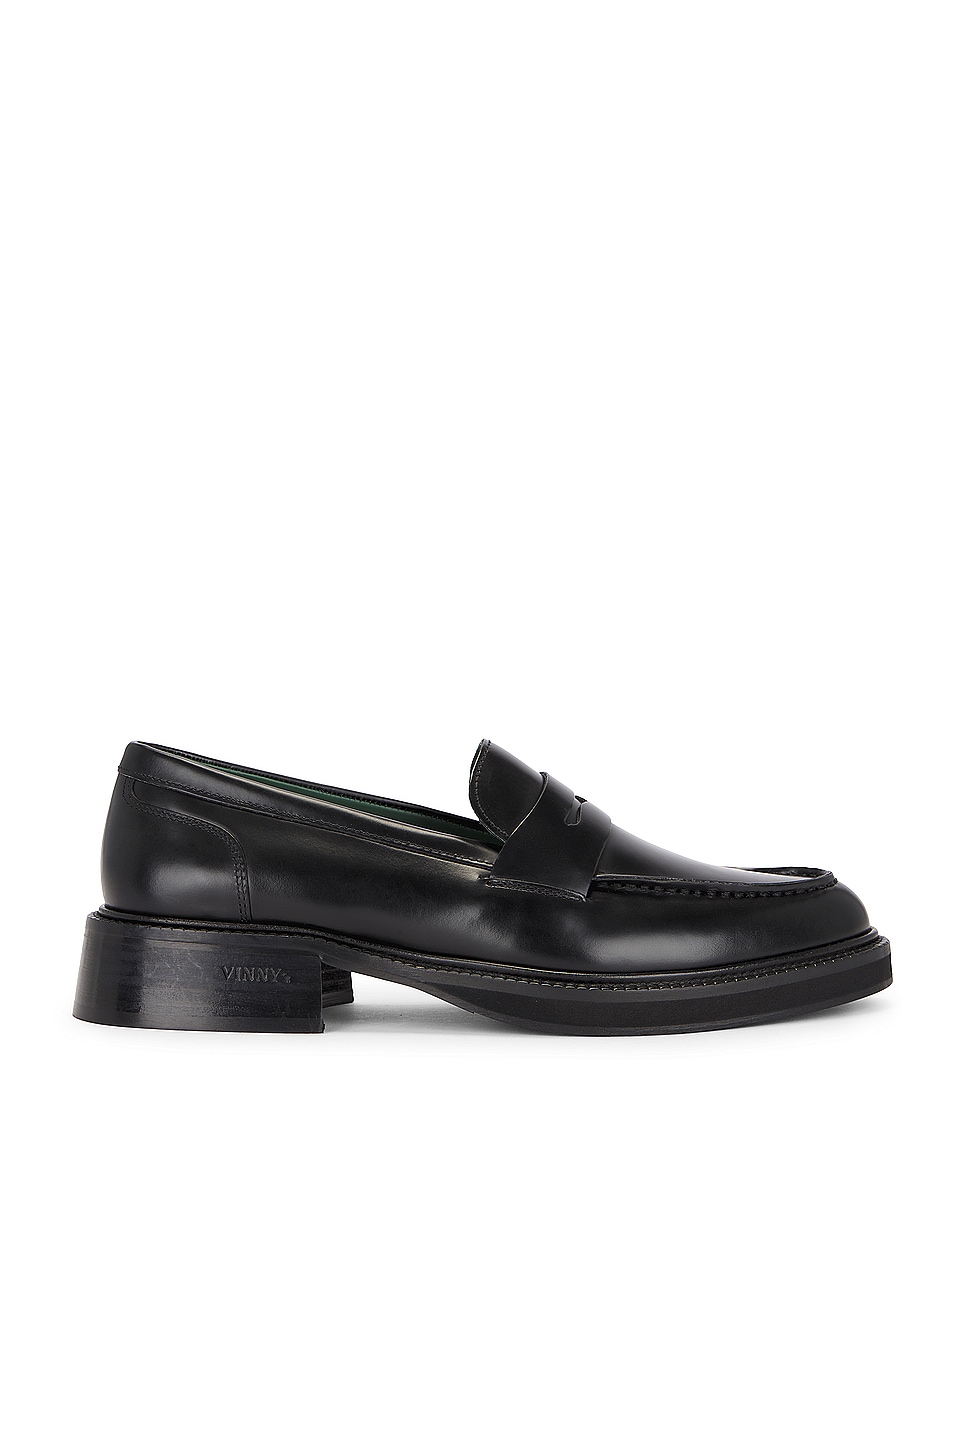 Image 1 of Vinny's Heeled Townee Penny Loafer in Polido Leather Black